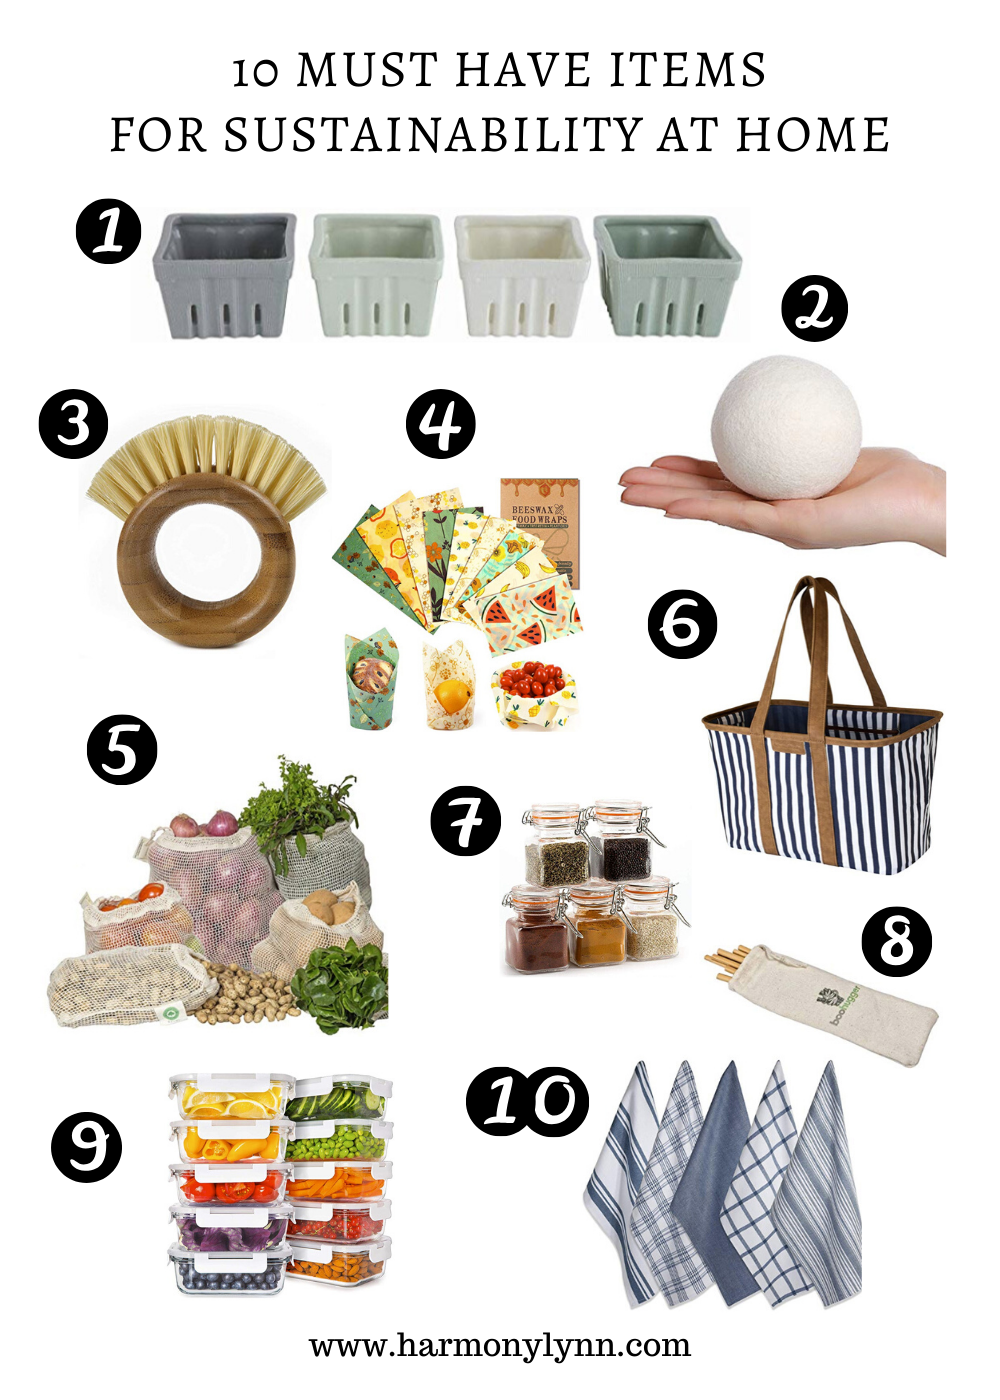 10 MUST HAVE ITEMS FOR SUSTAINABILITY AT HOME